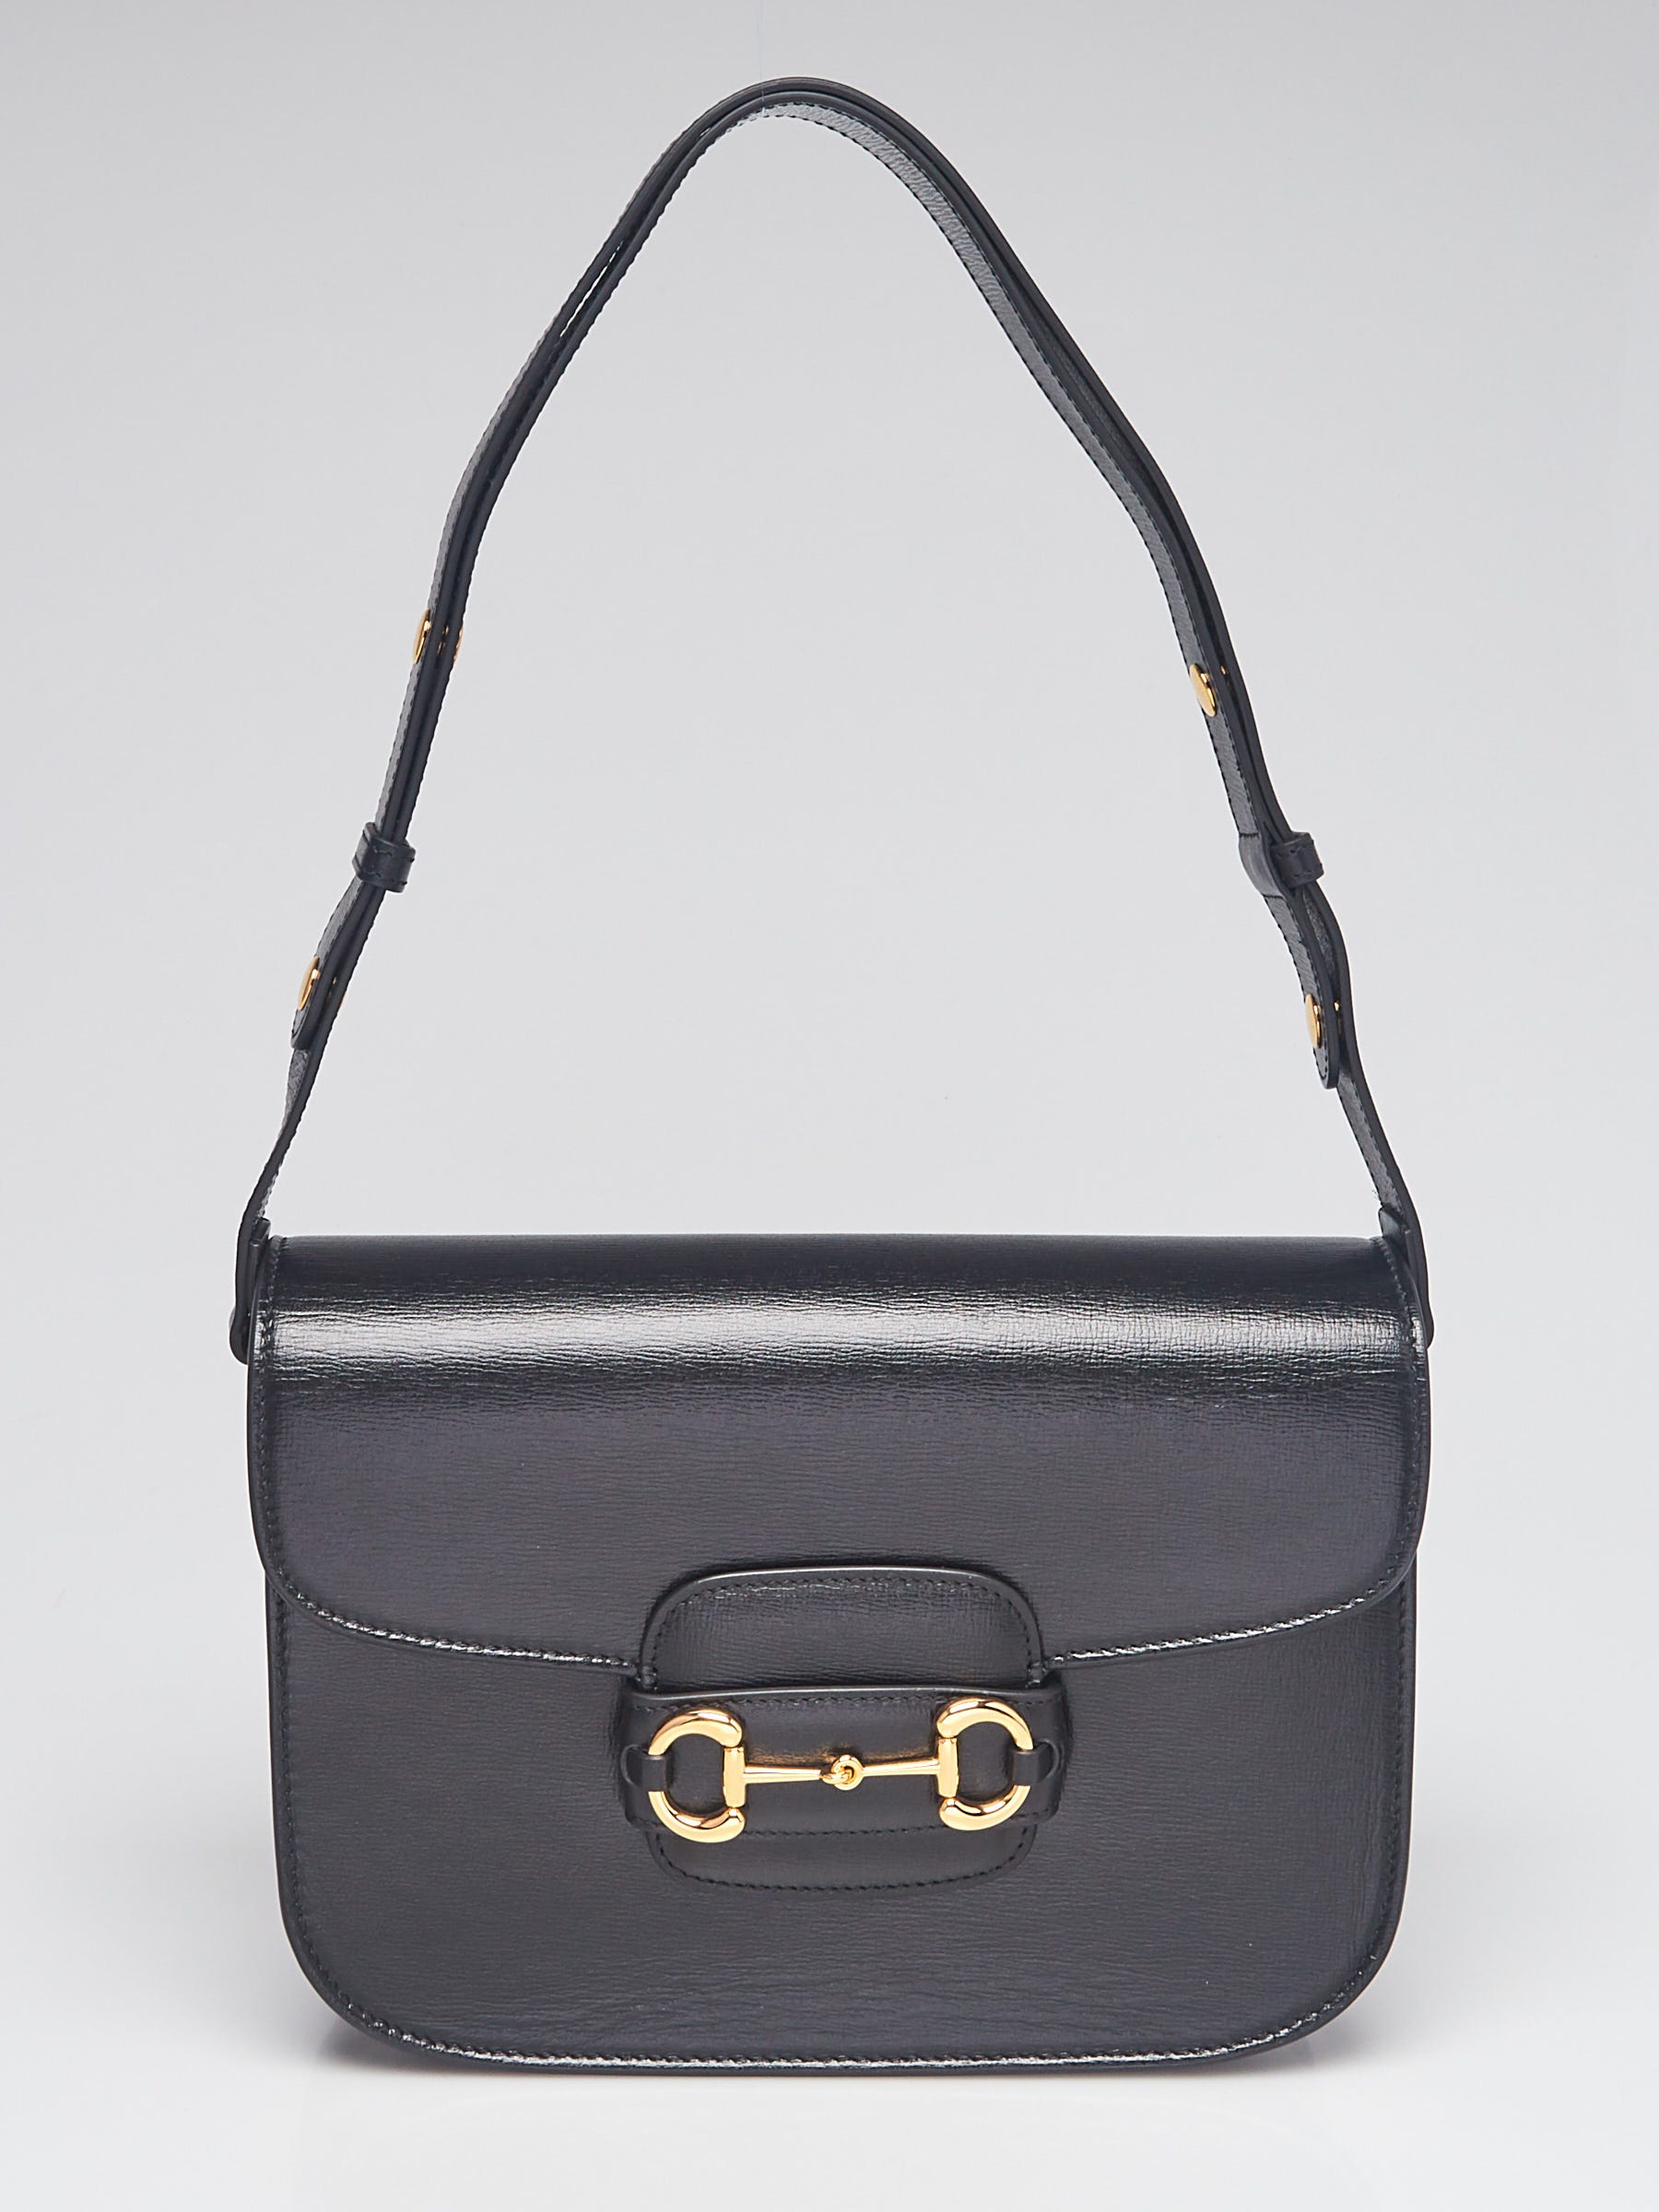 Gucci Horsebit Black Leather bag by Tom Ford